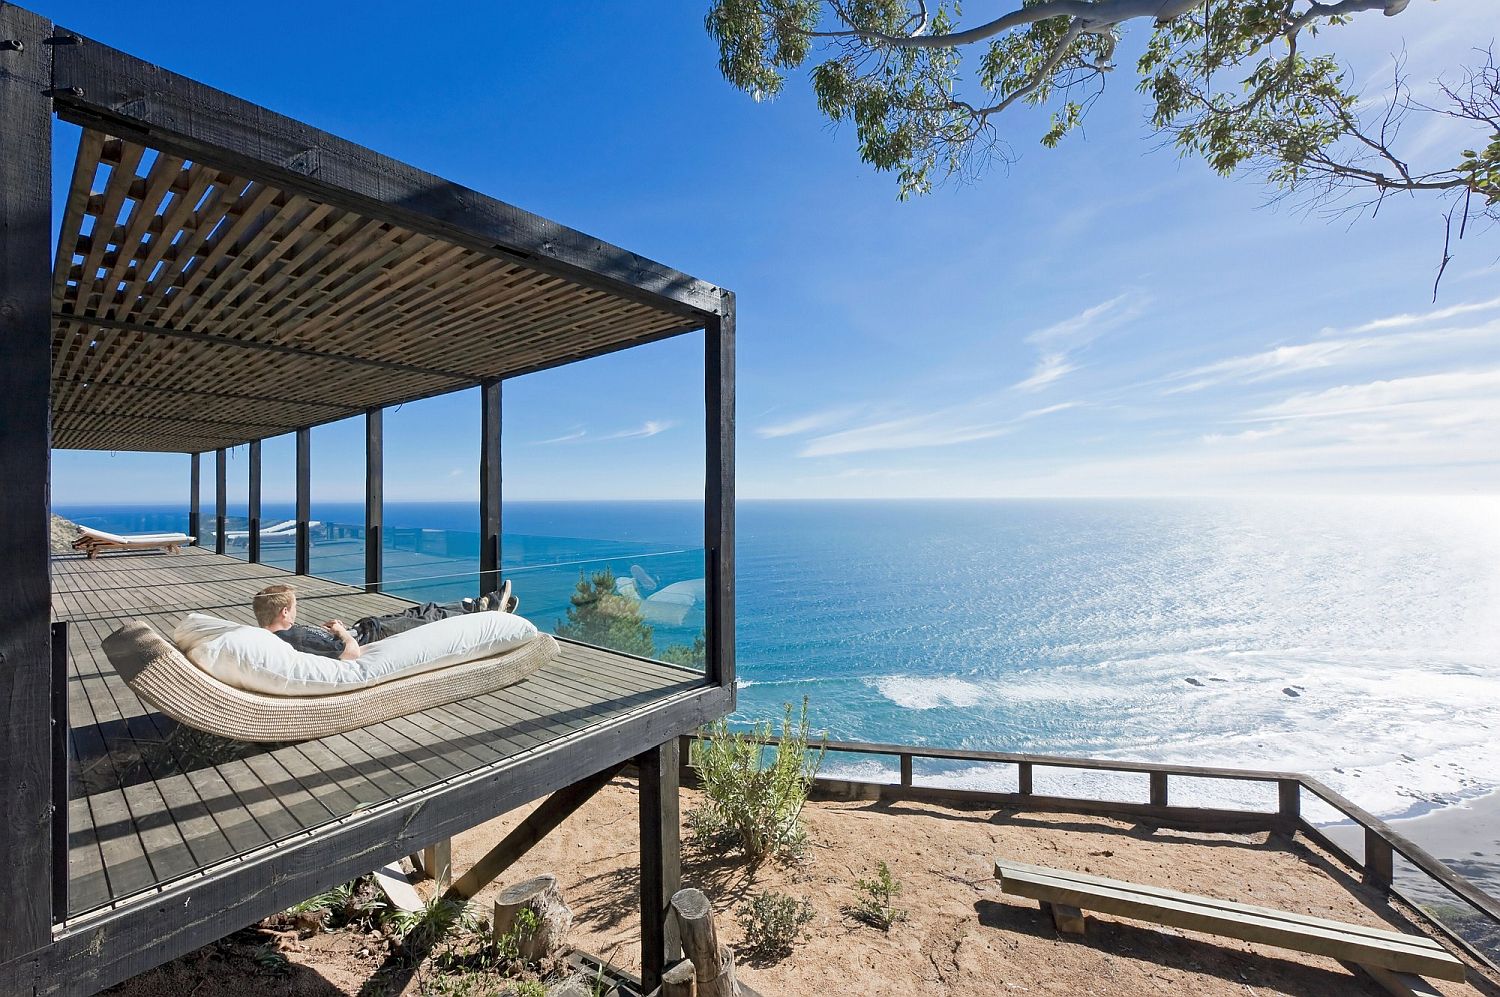 Deck-next-to-the-cliff-house-offers-complete-privacy-even-as-you-enjoy-the-majestic-views